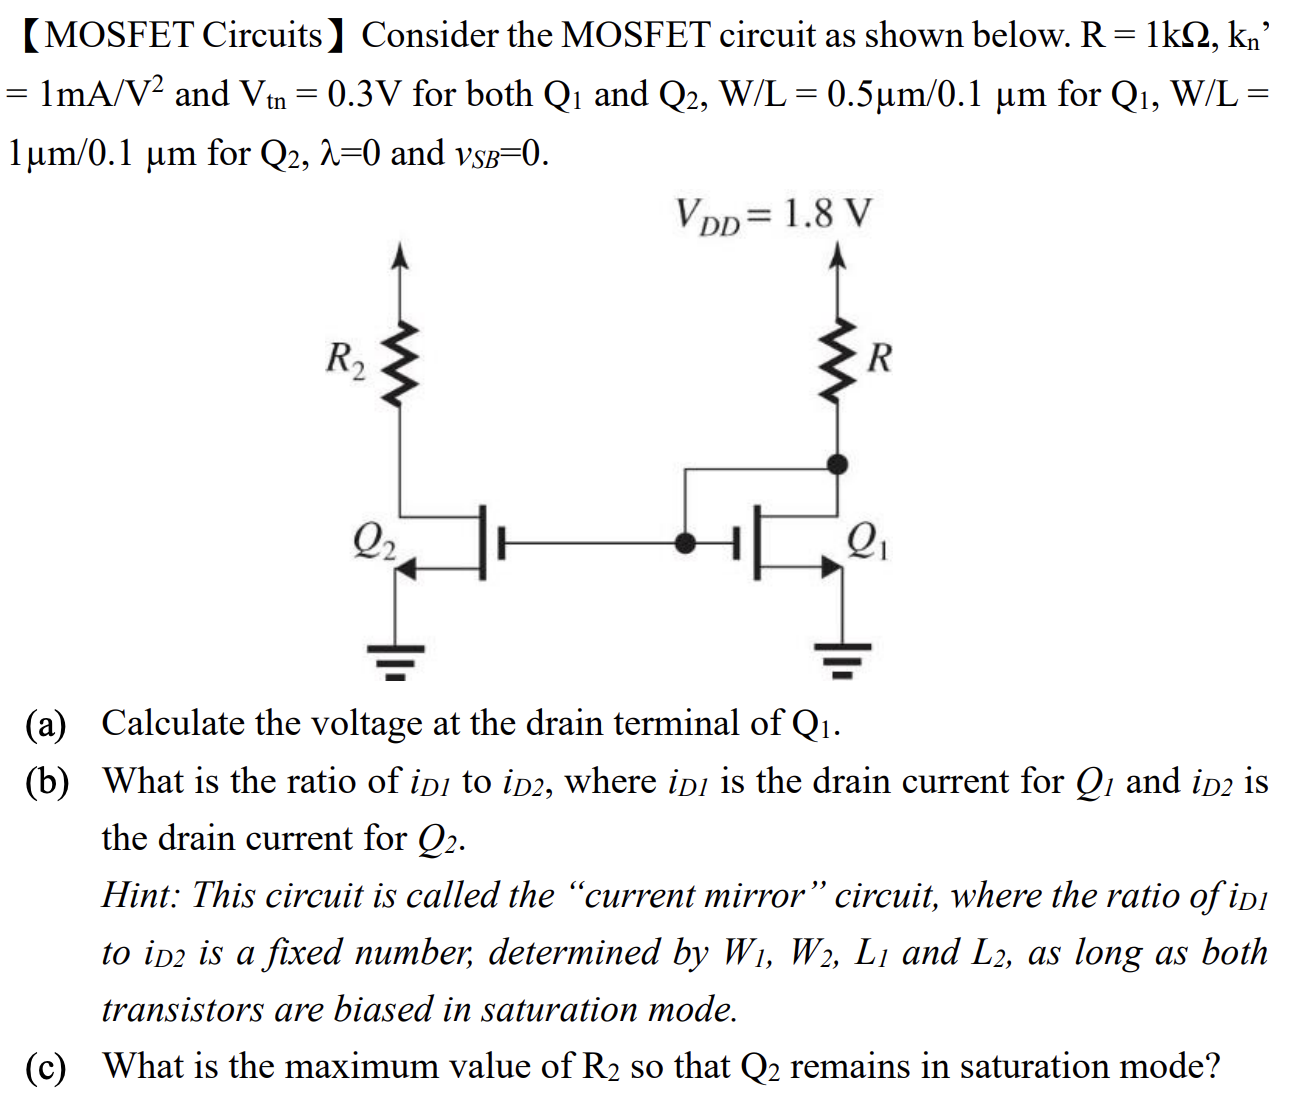 [MOSFET Circuits] Consider the MOSFET circuit as shown below. R = 1kΩ, kn’ = 1 mA/V2 and Vtn = 0.3 V for both Q1 and Q2, W/L = 0.5μm/0.1μm for Q1, W/L = 1μm/0.1μm for Q2, λ = 0 and vSB = 0. (a) Calculate the voltage at the drain terminal of Q1. (b) What is the ratio of iD1 to iD2, where iD1 is the drain current for Q1 and iD2 is the drain current for Q2. Hint: This circuit is called the "current mirror" circuit, where the ratio of iD1 to iD2 is a fixed number, determined by W1, W2, L1 and L2, as long as both transistors are biased in saturation mode. (c) What is the maximum value of R2 so that Q2 remains in saturation mode?